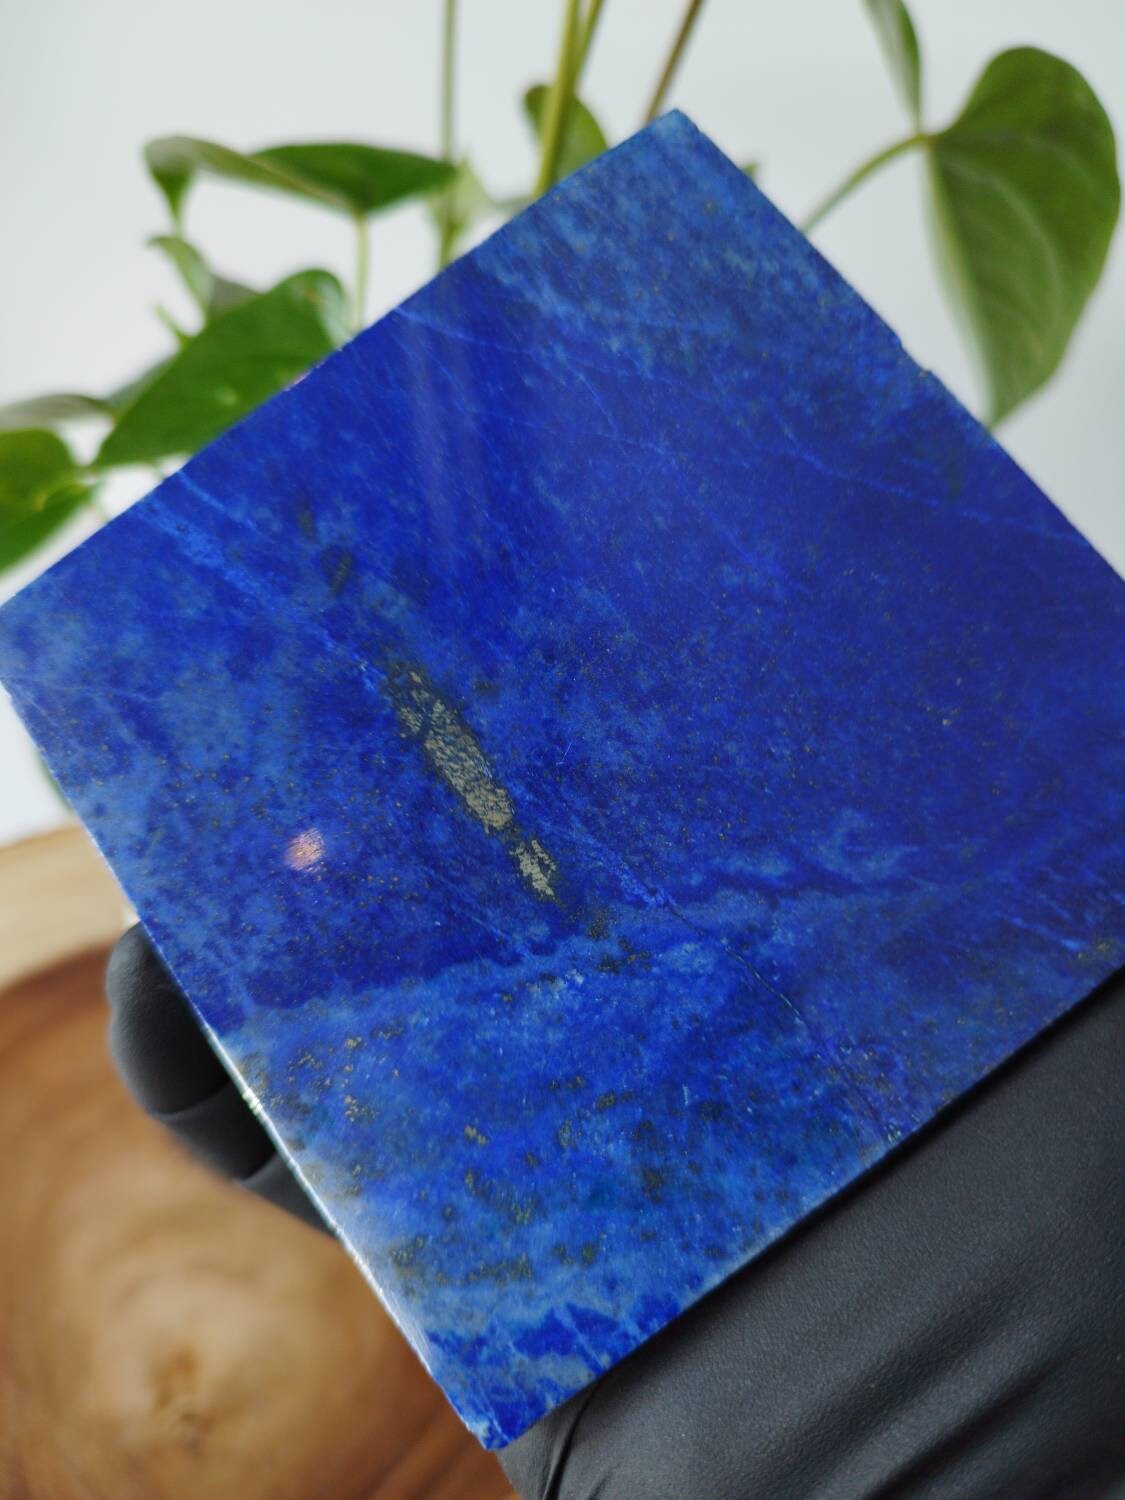 10 x 10 cm Polished Stone Sided Tile | A+++ Lapis Lazuli, Crystal decor, Grade A++ Protection, Tumbled, peace, success, Crystal Gifts